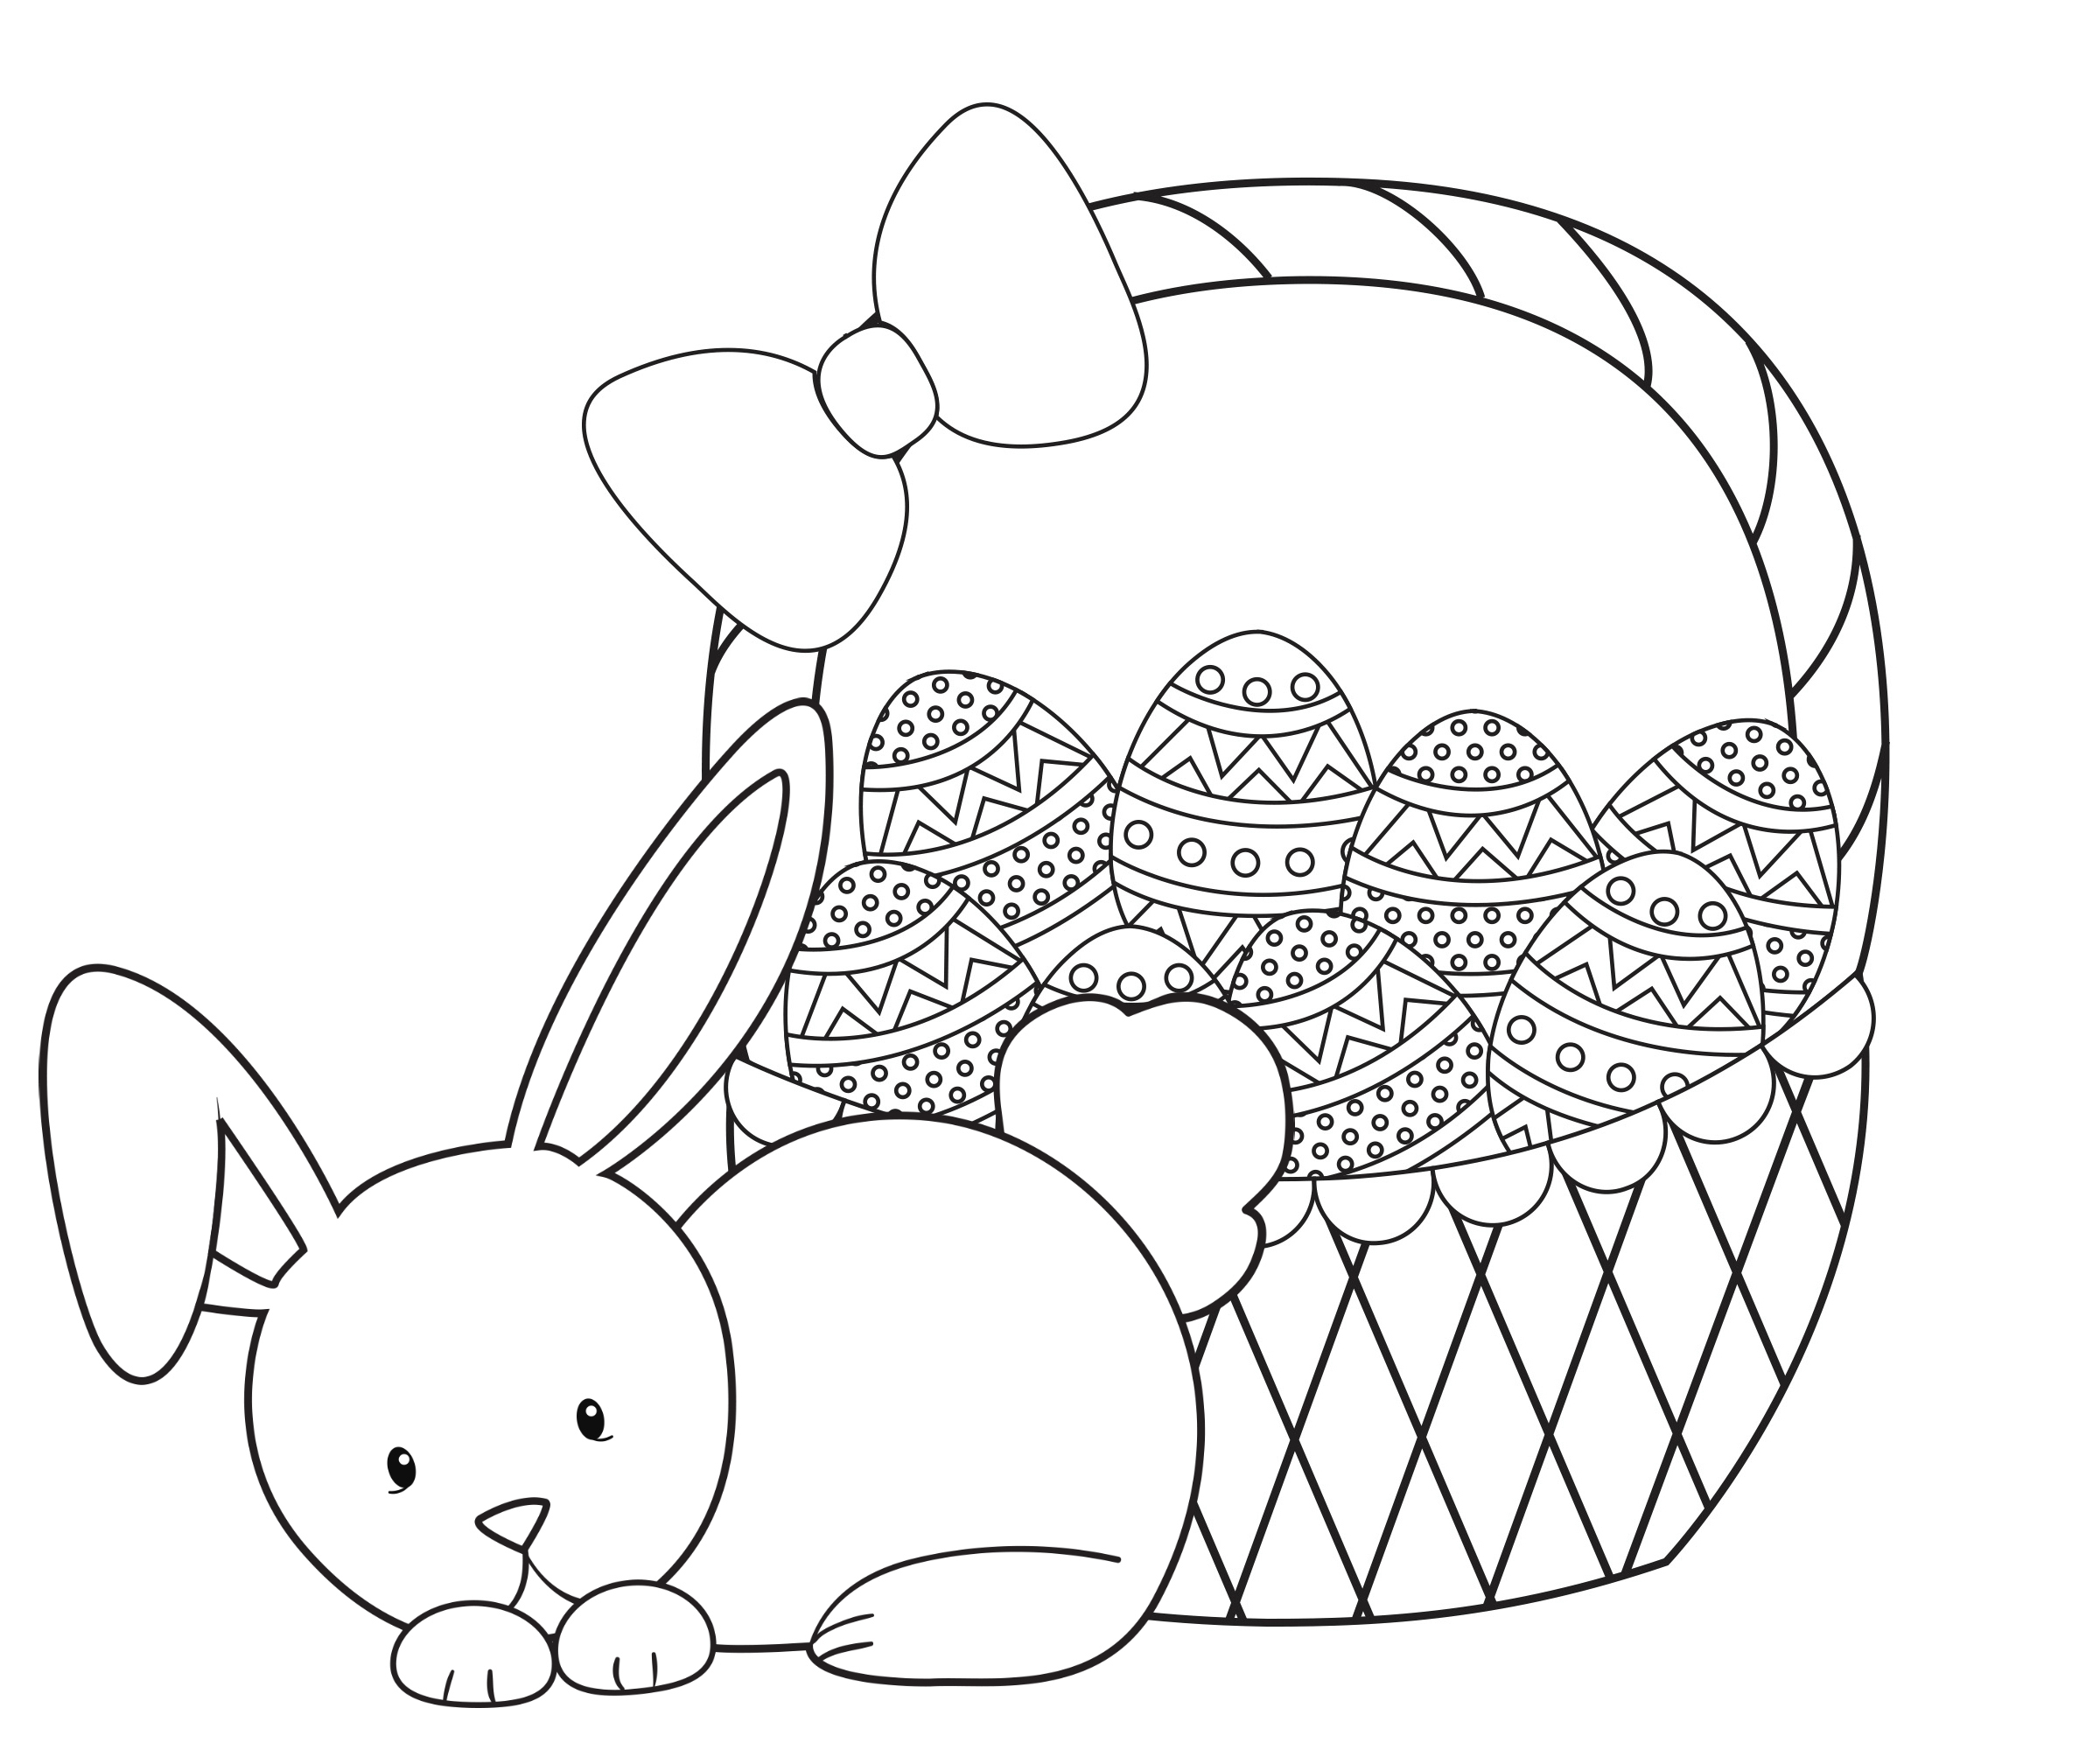 Easter Coloring Pages For Kids - Crazy Little Projects - Free Printable Easter Coloring Pages For Toddlers